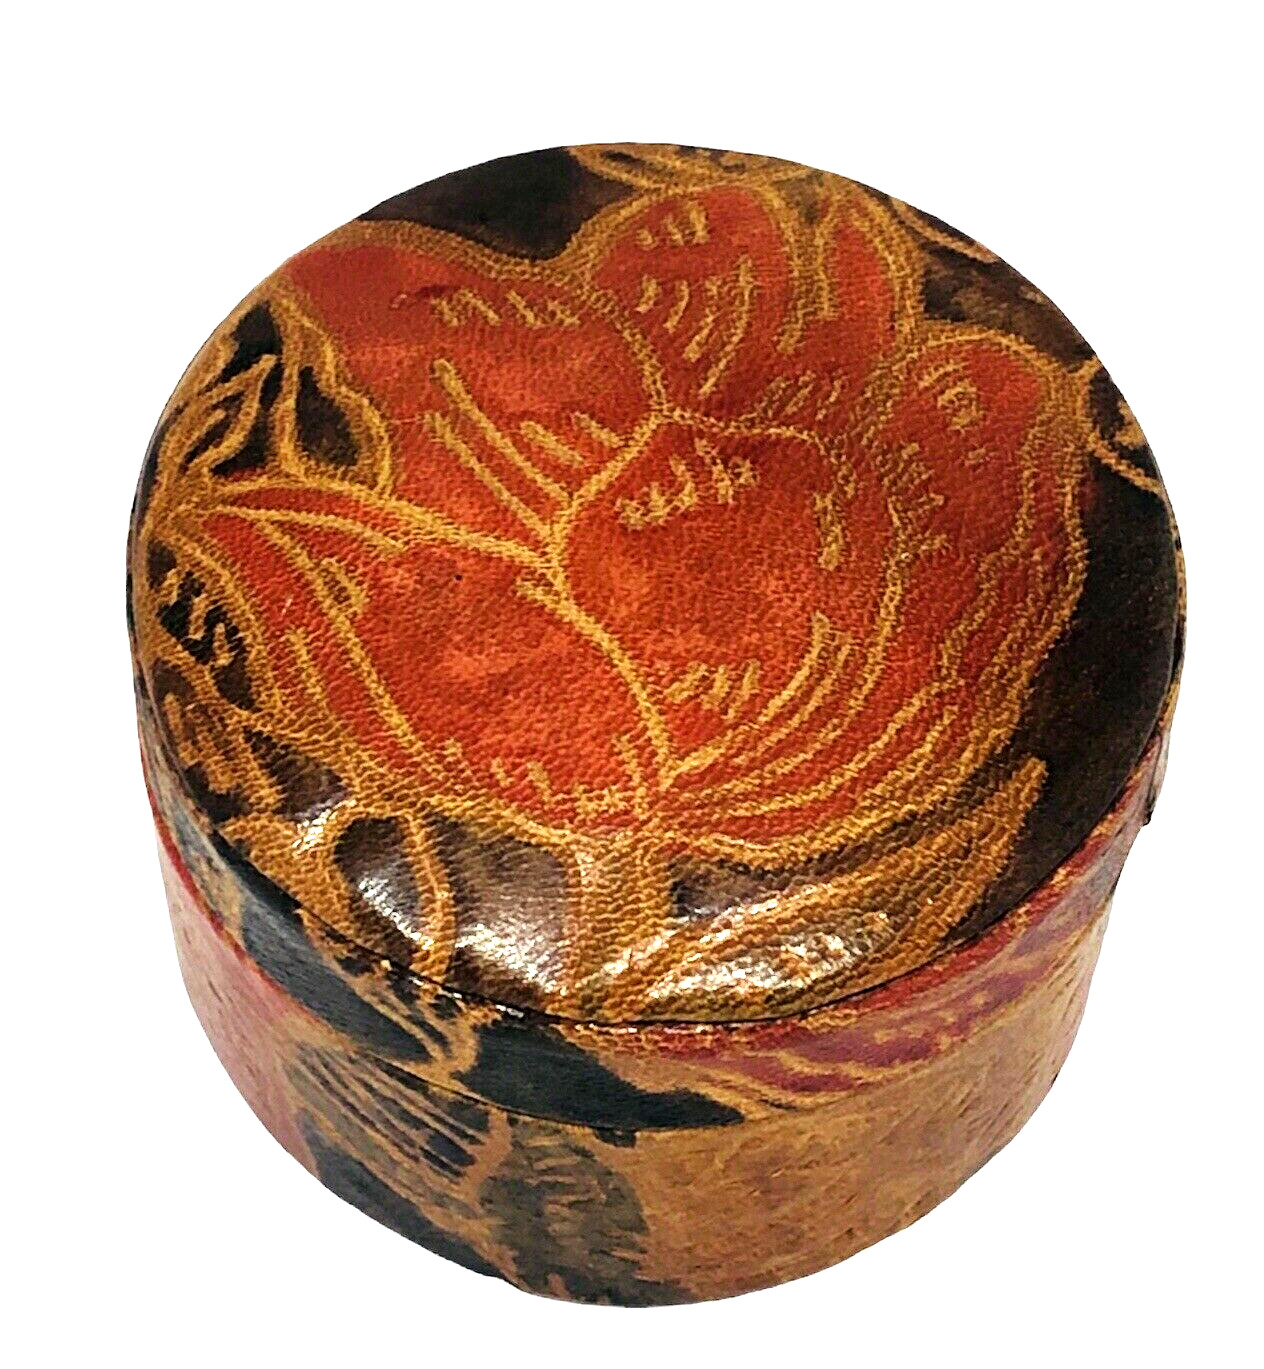 Tooled Leather Floral Flower Trinket or Jewelry Box With Lid Red Brown Green